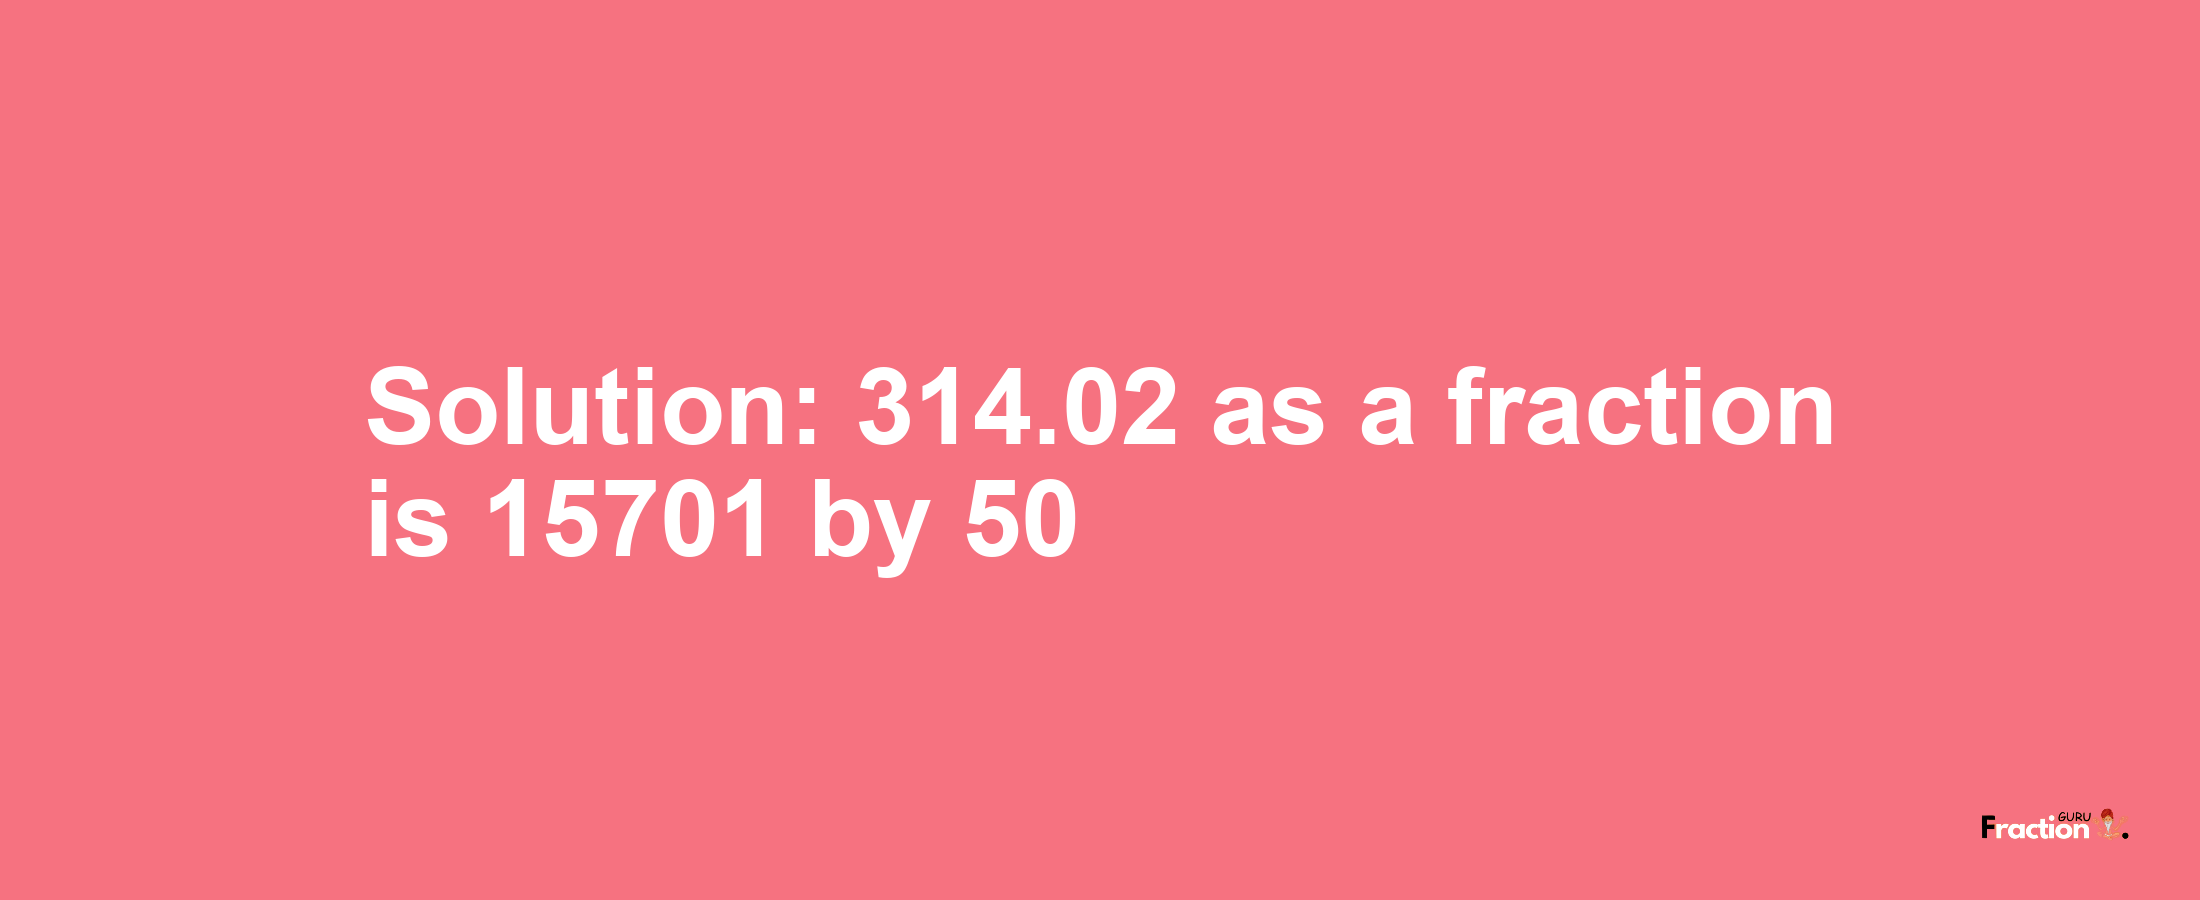 Solution:314.02 as a fraction is 15701/50